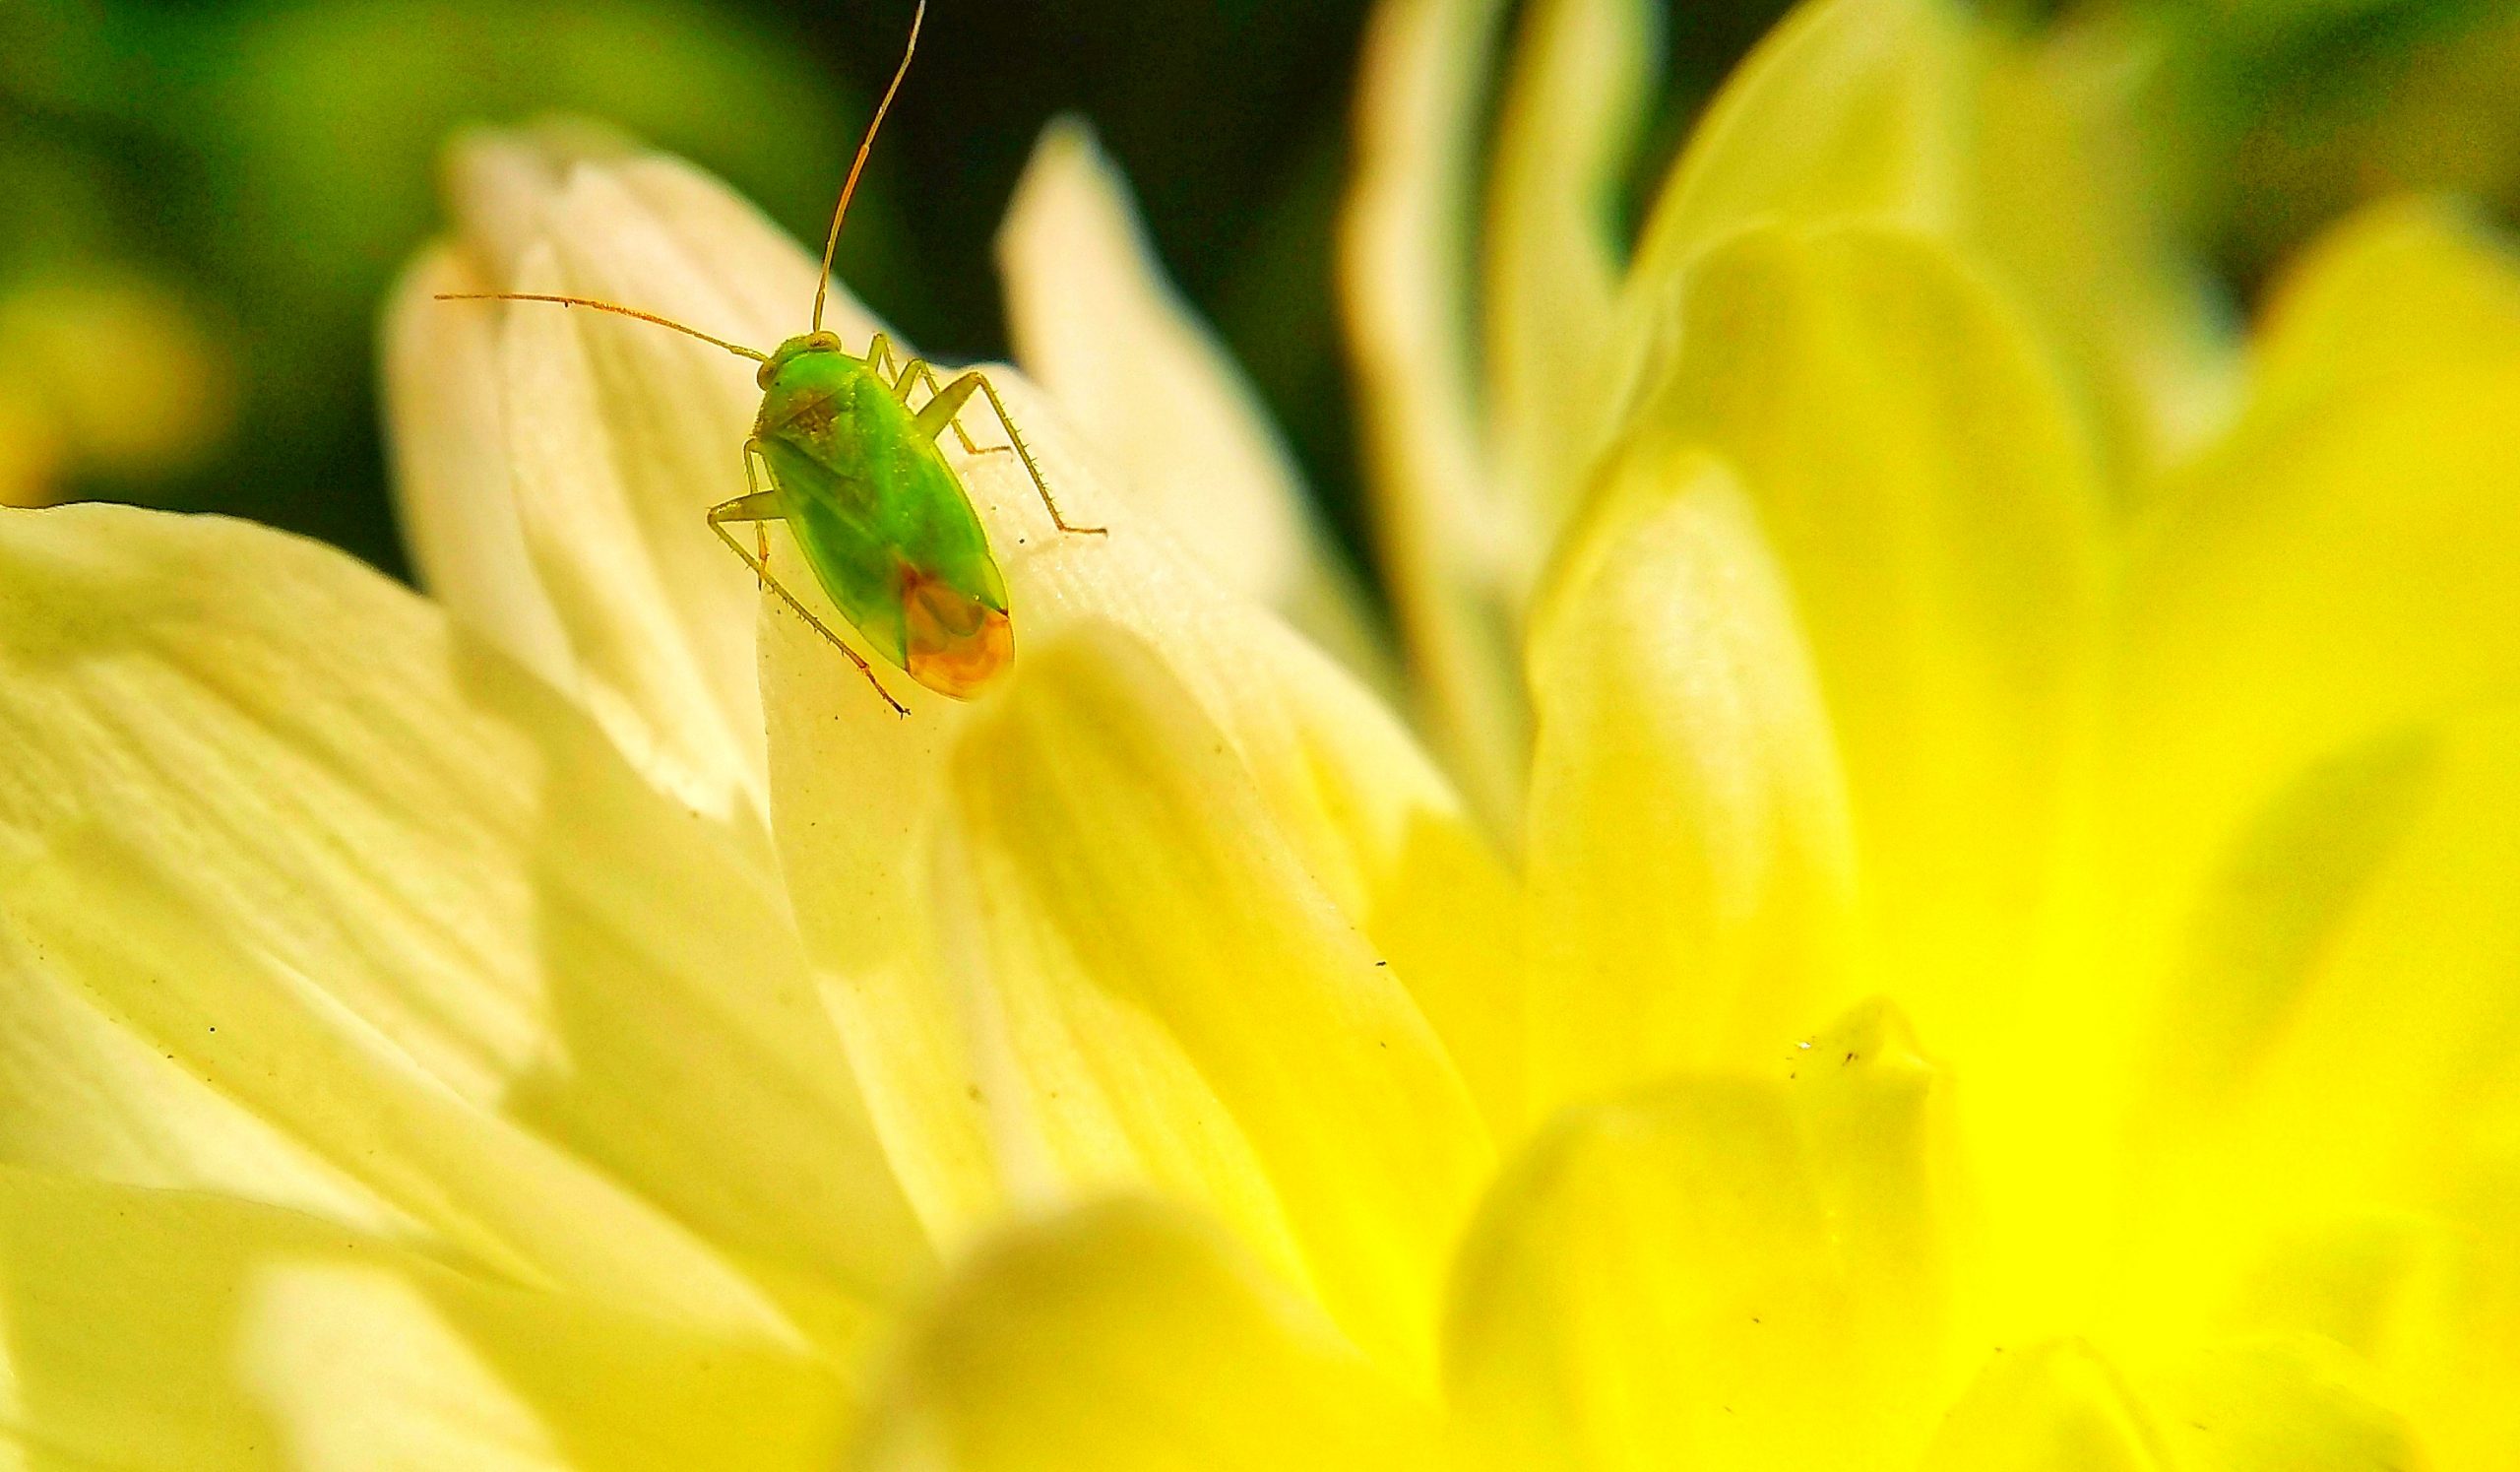 Insect on a yellow flower